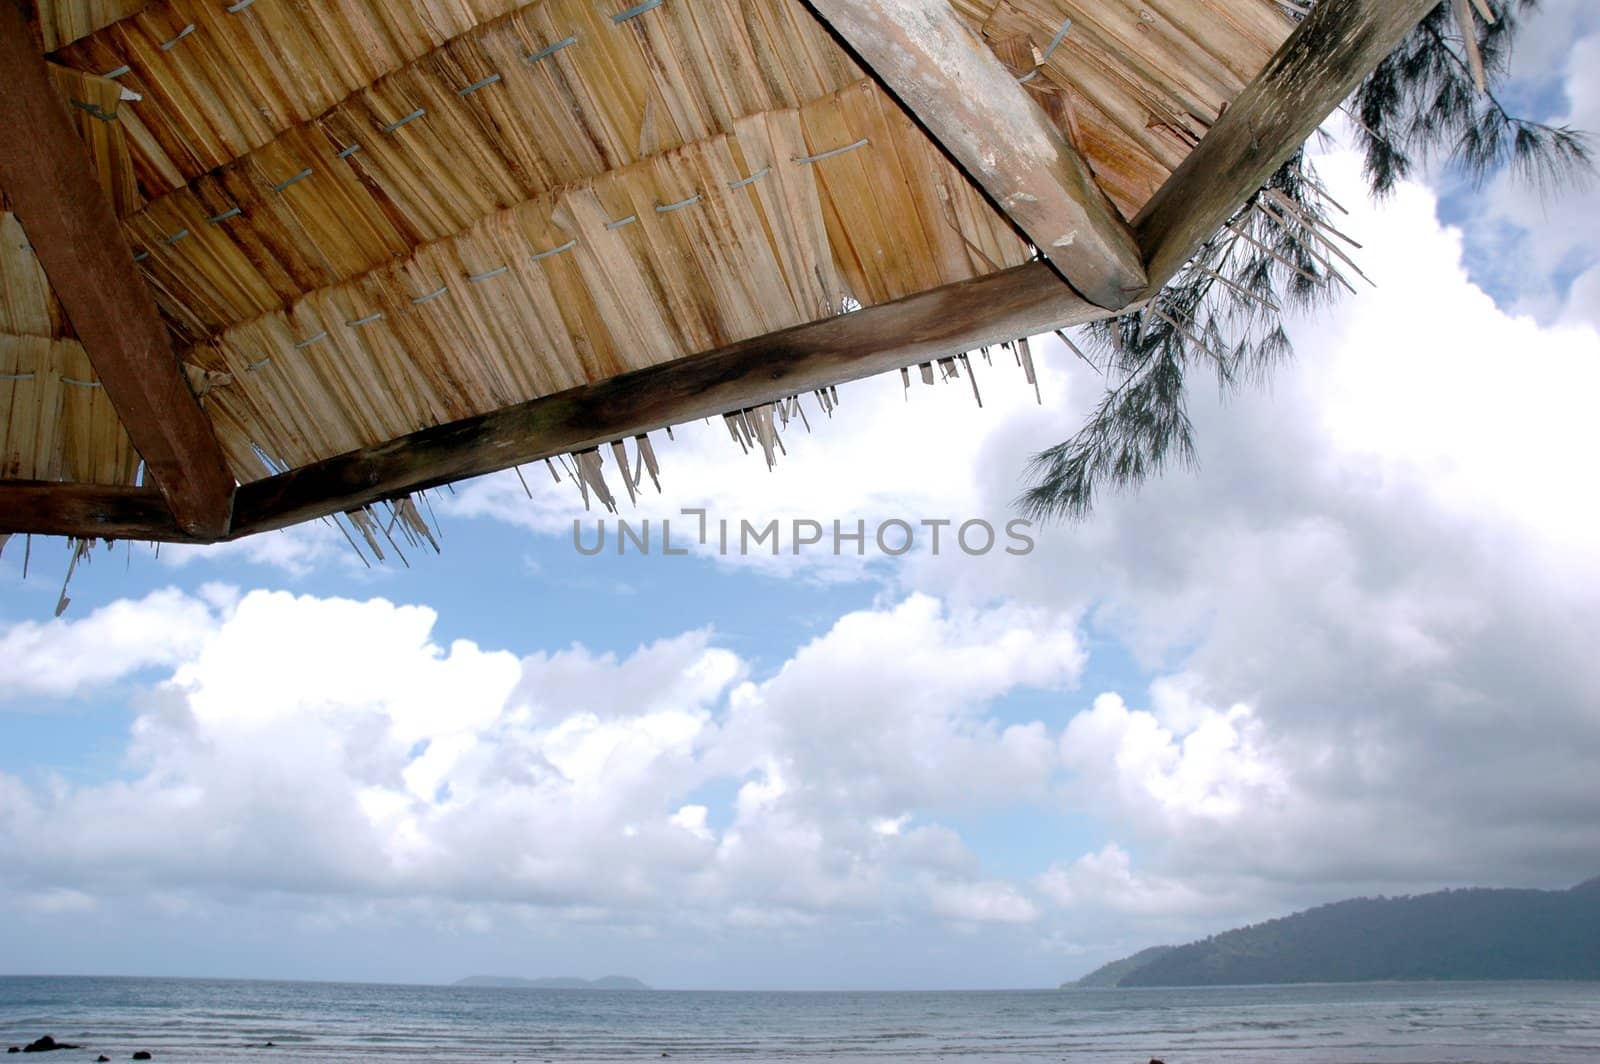 Hut against bright blue sky on a tropical resort